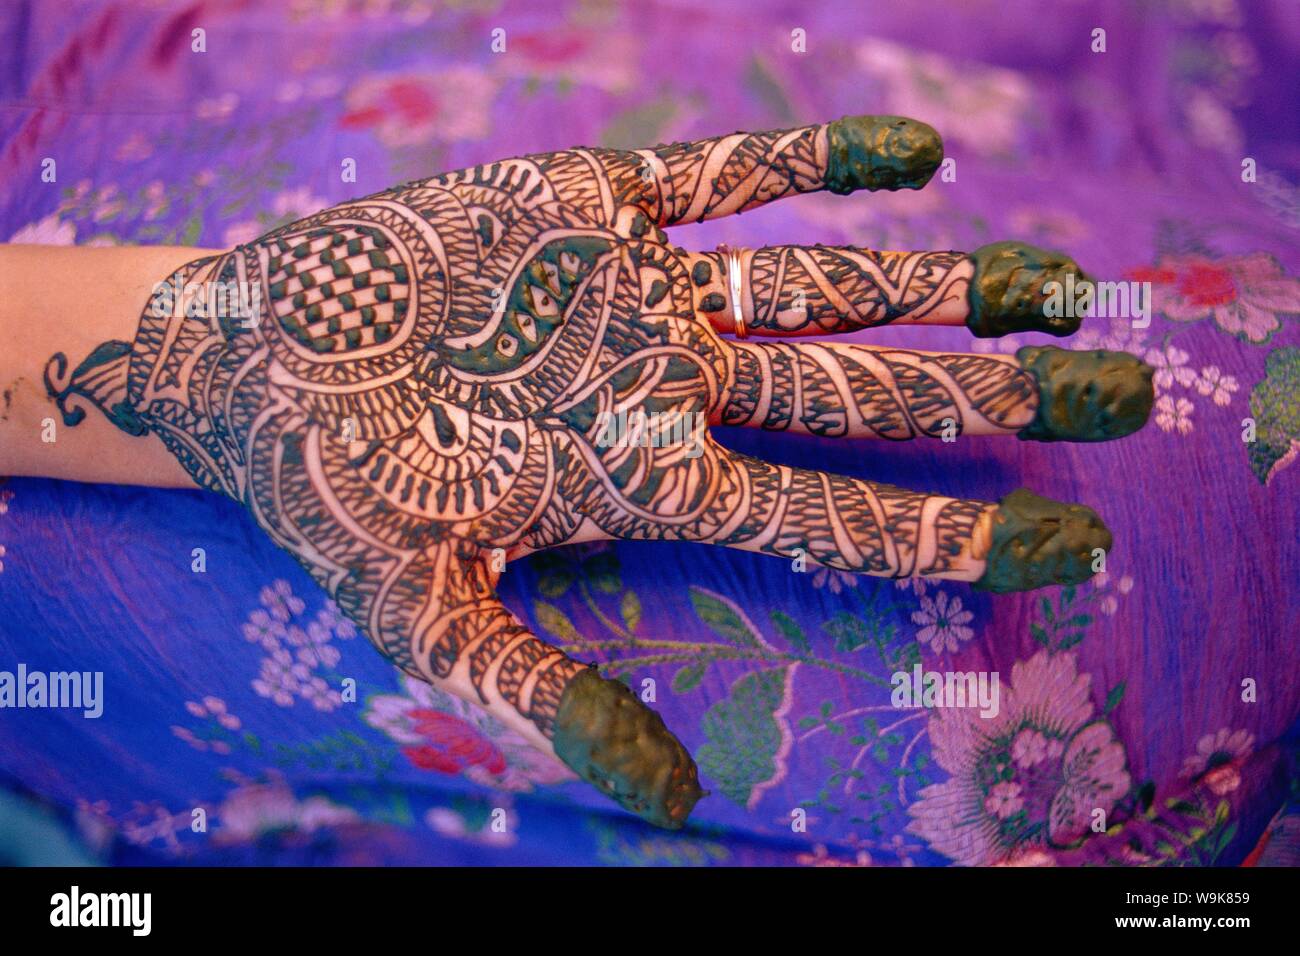 Hand decorated with design in henna, Rajasthan, India Stock Photo